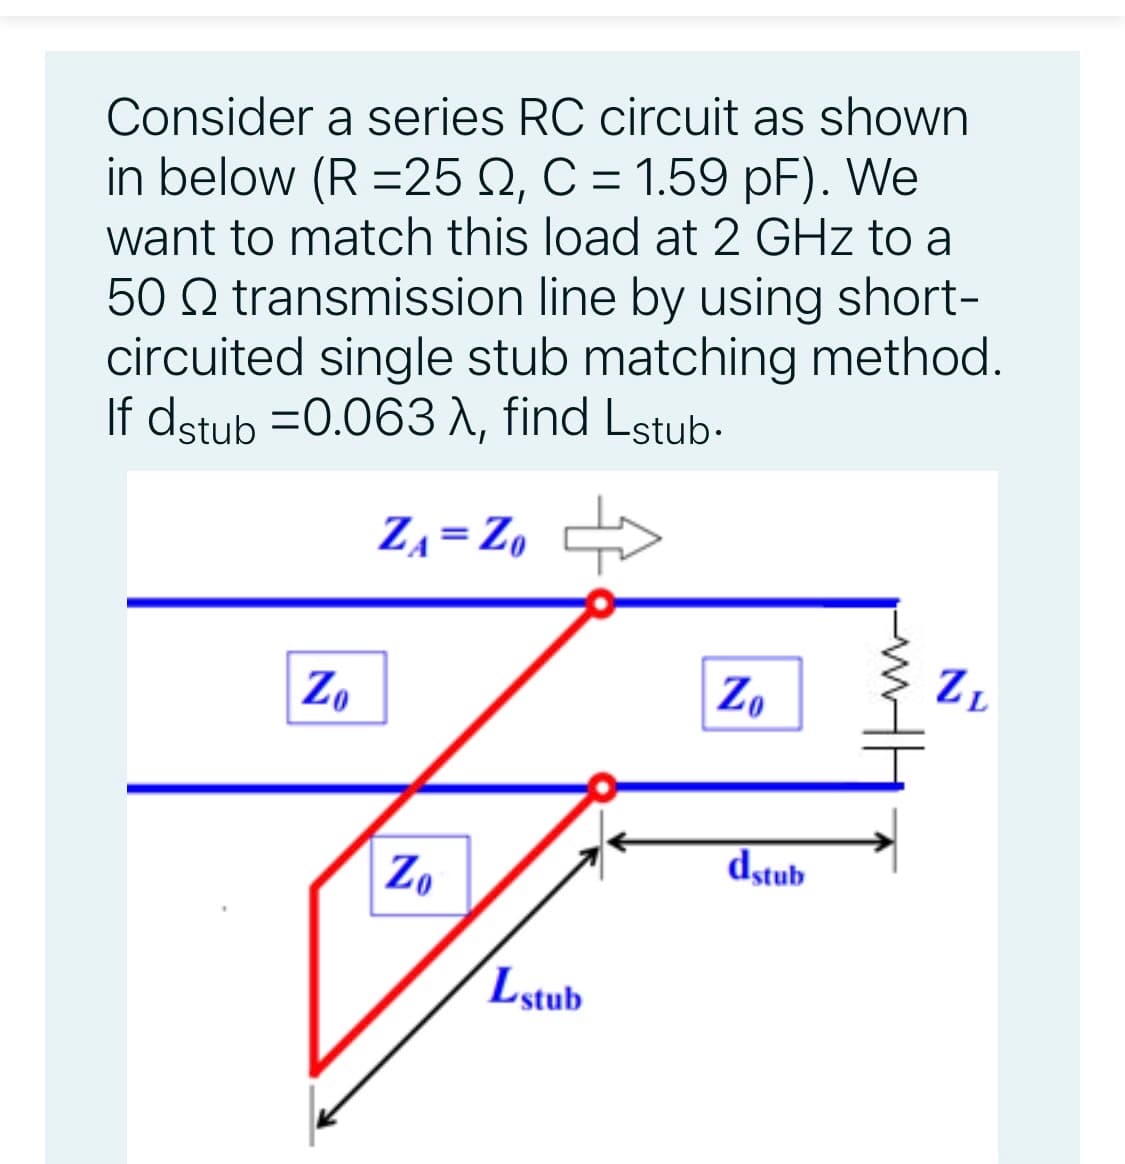 Consider a series RC circuit as shown
in below (R =25 Q, C = 1.59 pF). We
want to match this load at 2 GHz to a
50 Q transmission line by using short-
circuited single stub matching method.
If dstub =0.063 A, find Lstub-
Z, = Z, >
Z.
Zo
ZL
dstub
Zo
Lstub
